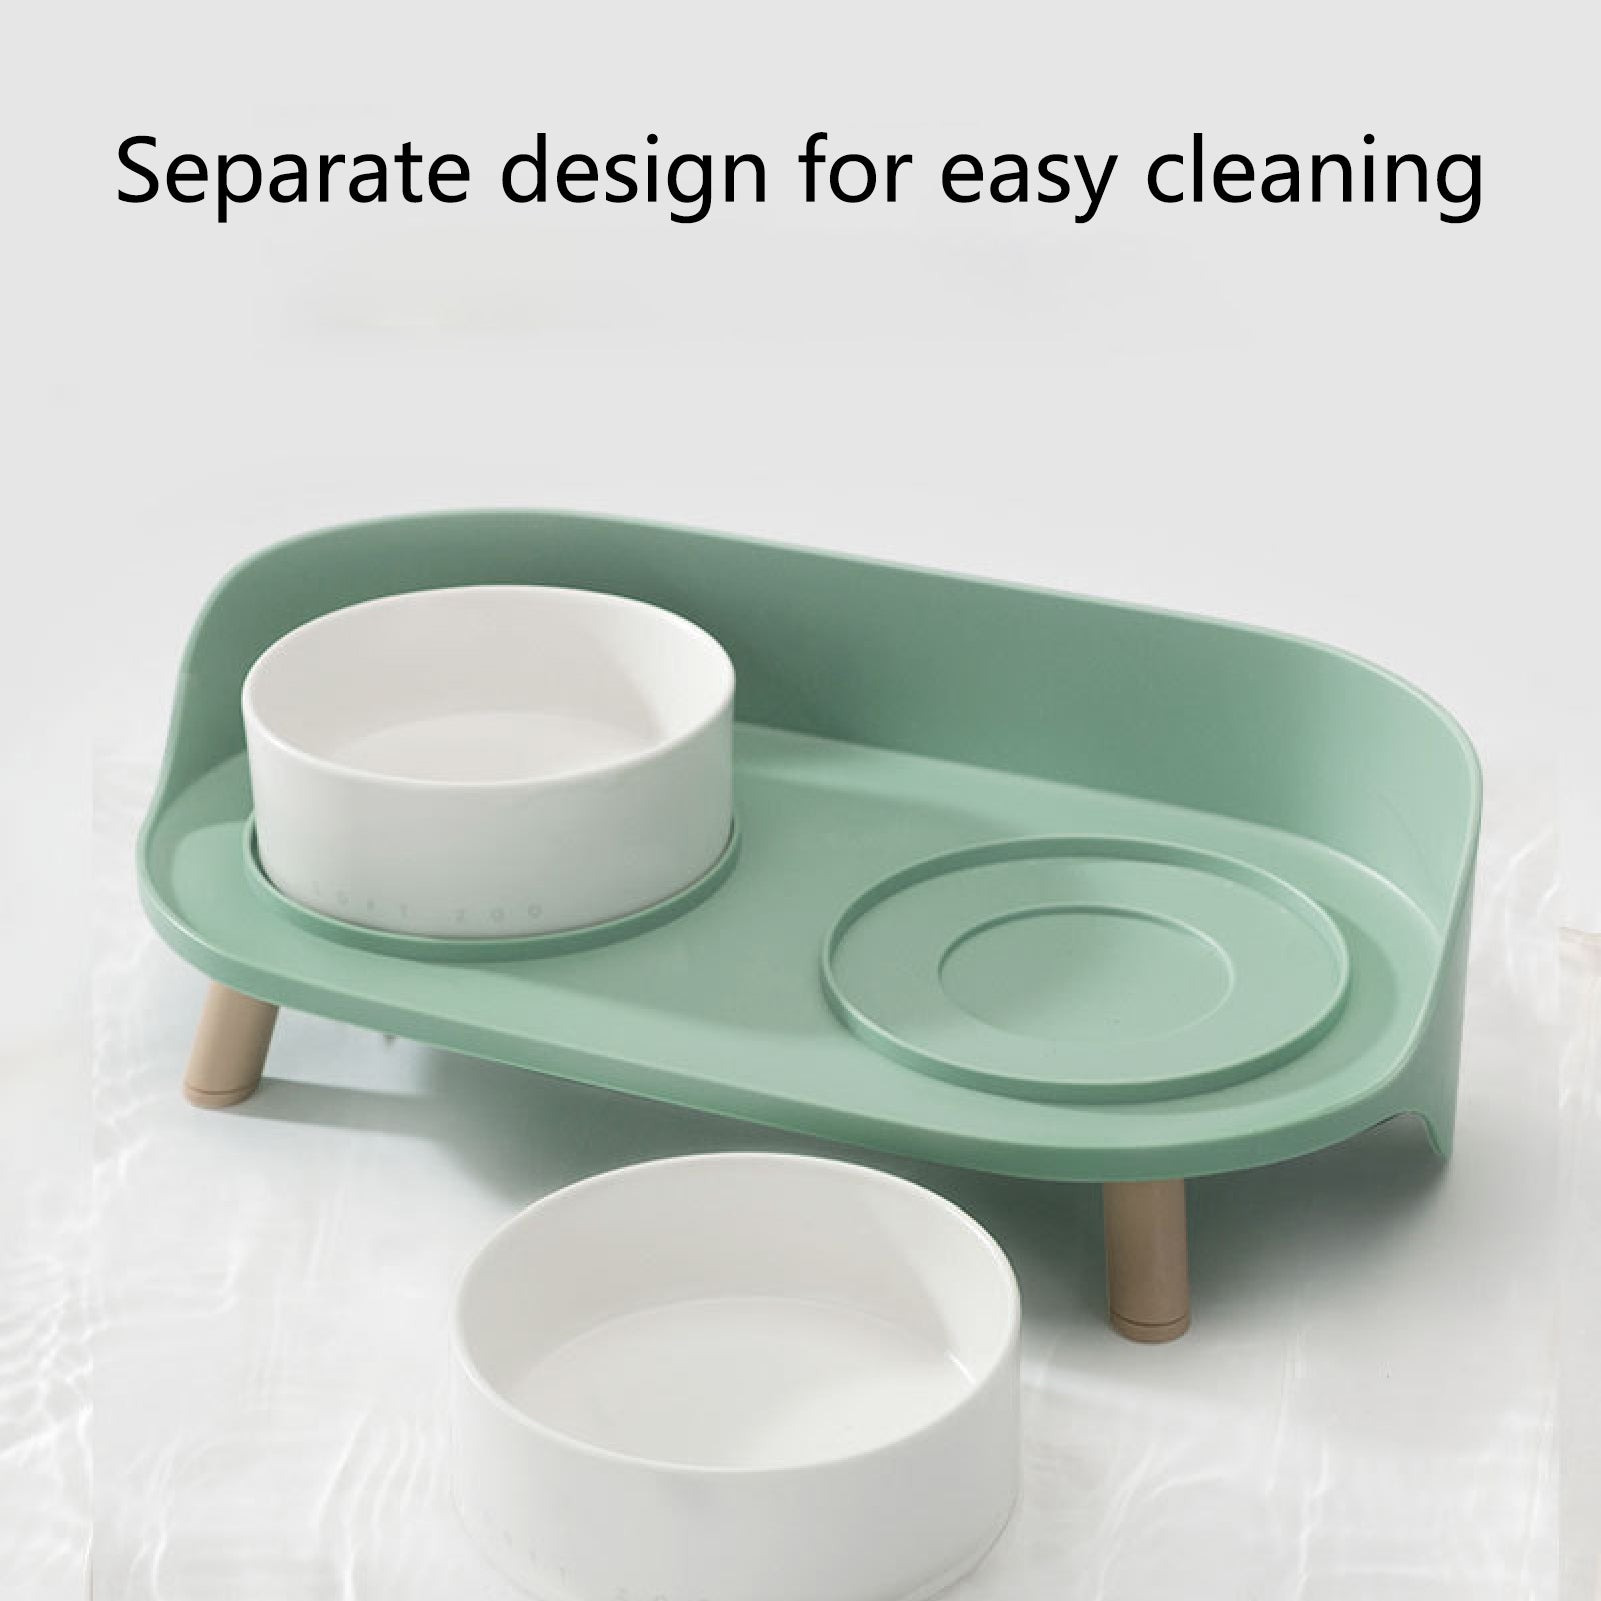 Dogs Cats Ceramic Feeding Bowl -Seperate design for easy cleaning